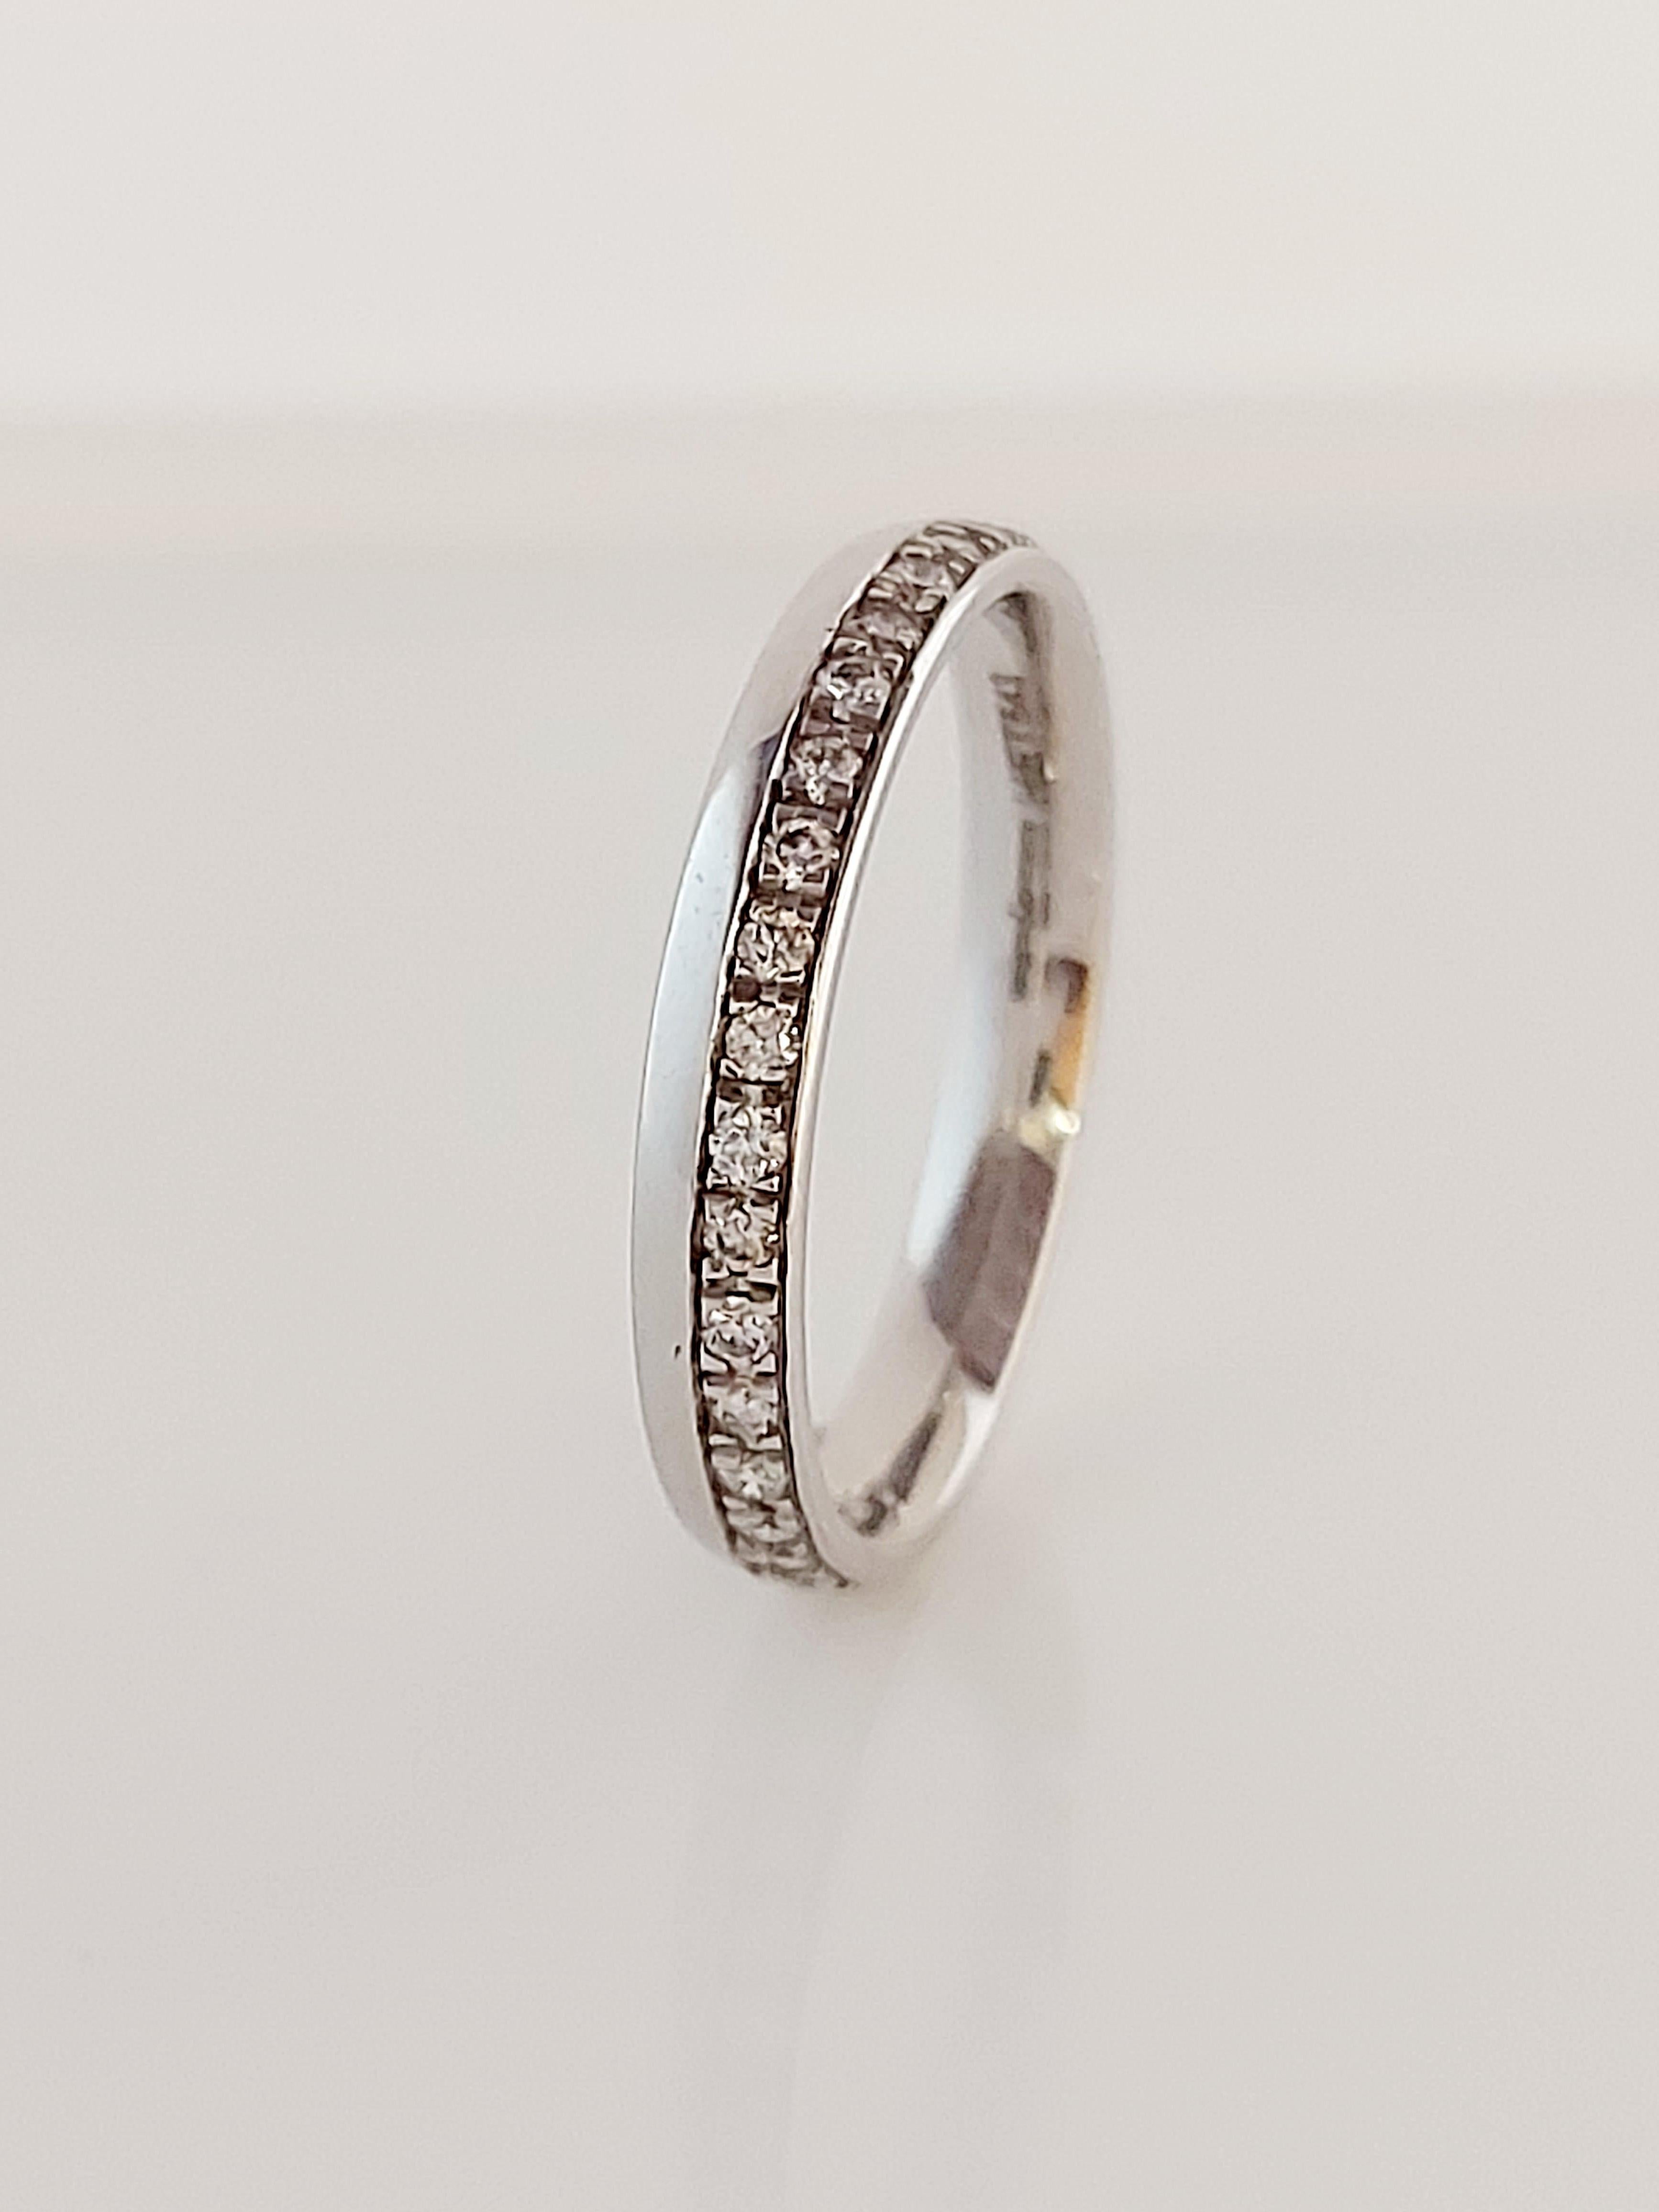 Offset diamond band ring brilliant cut diamonds grain set along edge, total diamond weight.22ct, hallmarked 18ct white gold. Handcrafted by Brown & Newirth model no HET543.